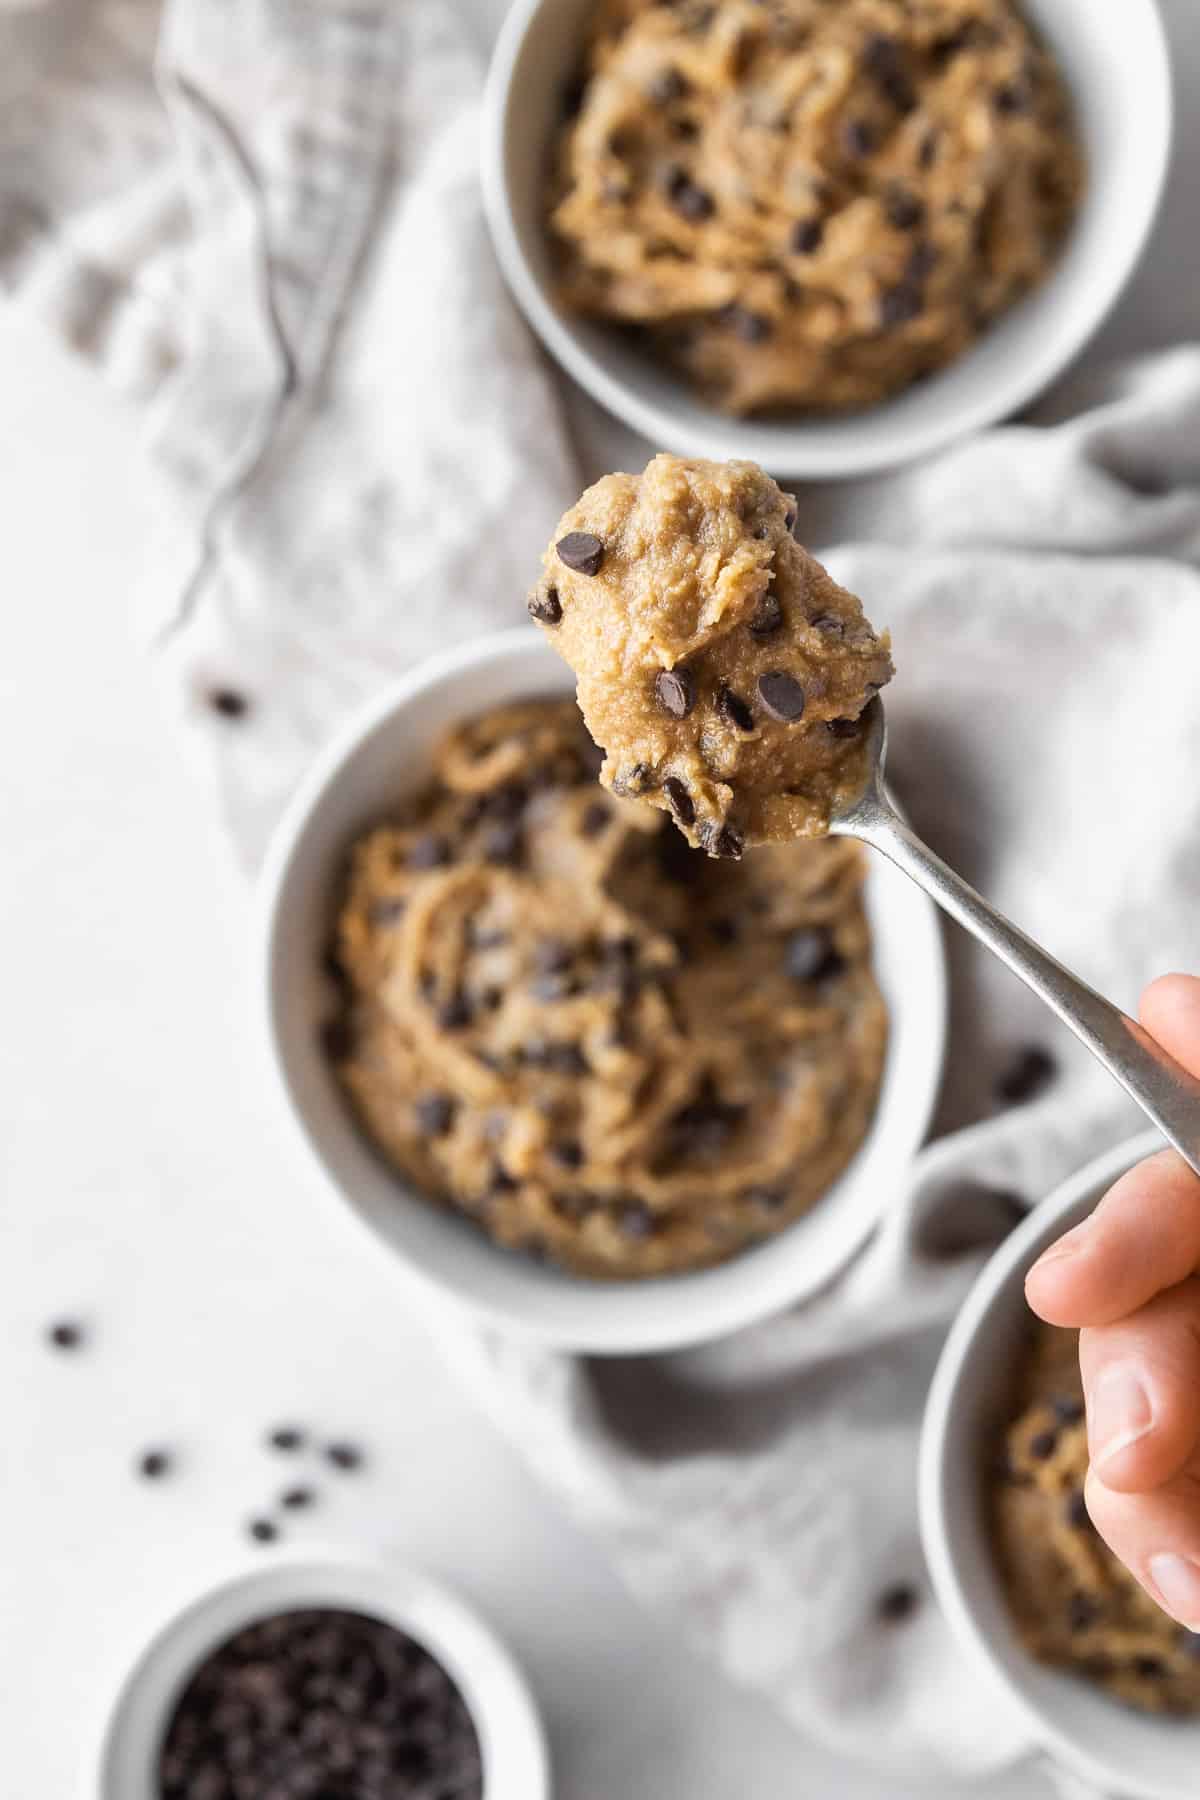 Closeup on a spoonful of edible vegan cookie dough with the three bowls filled with it blurred out in the background.